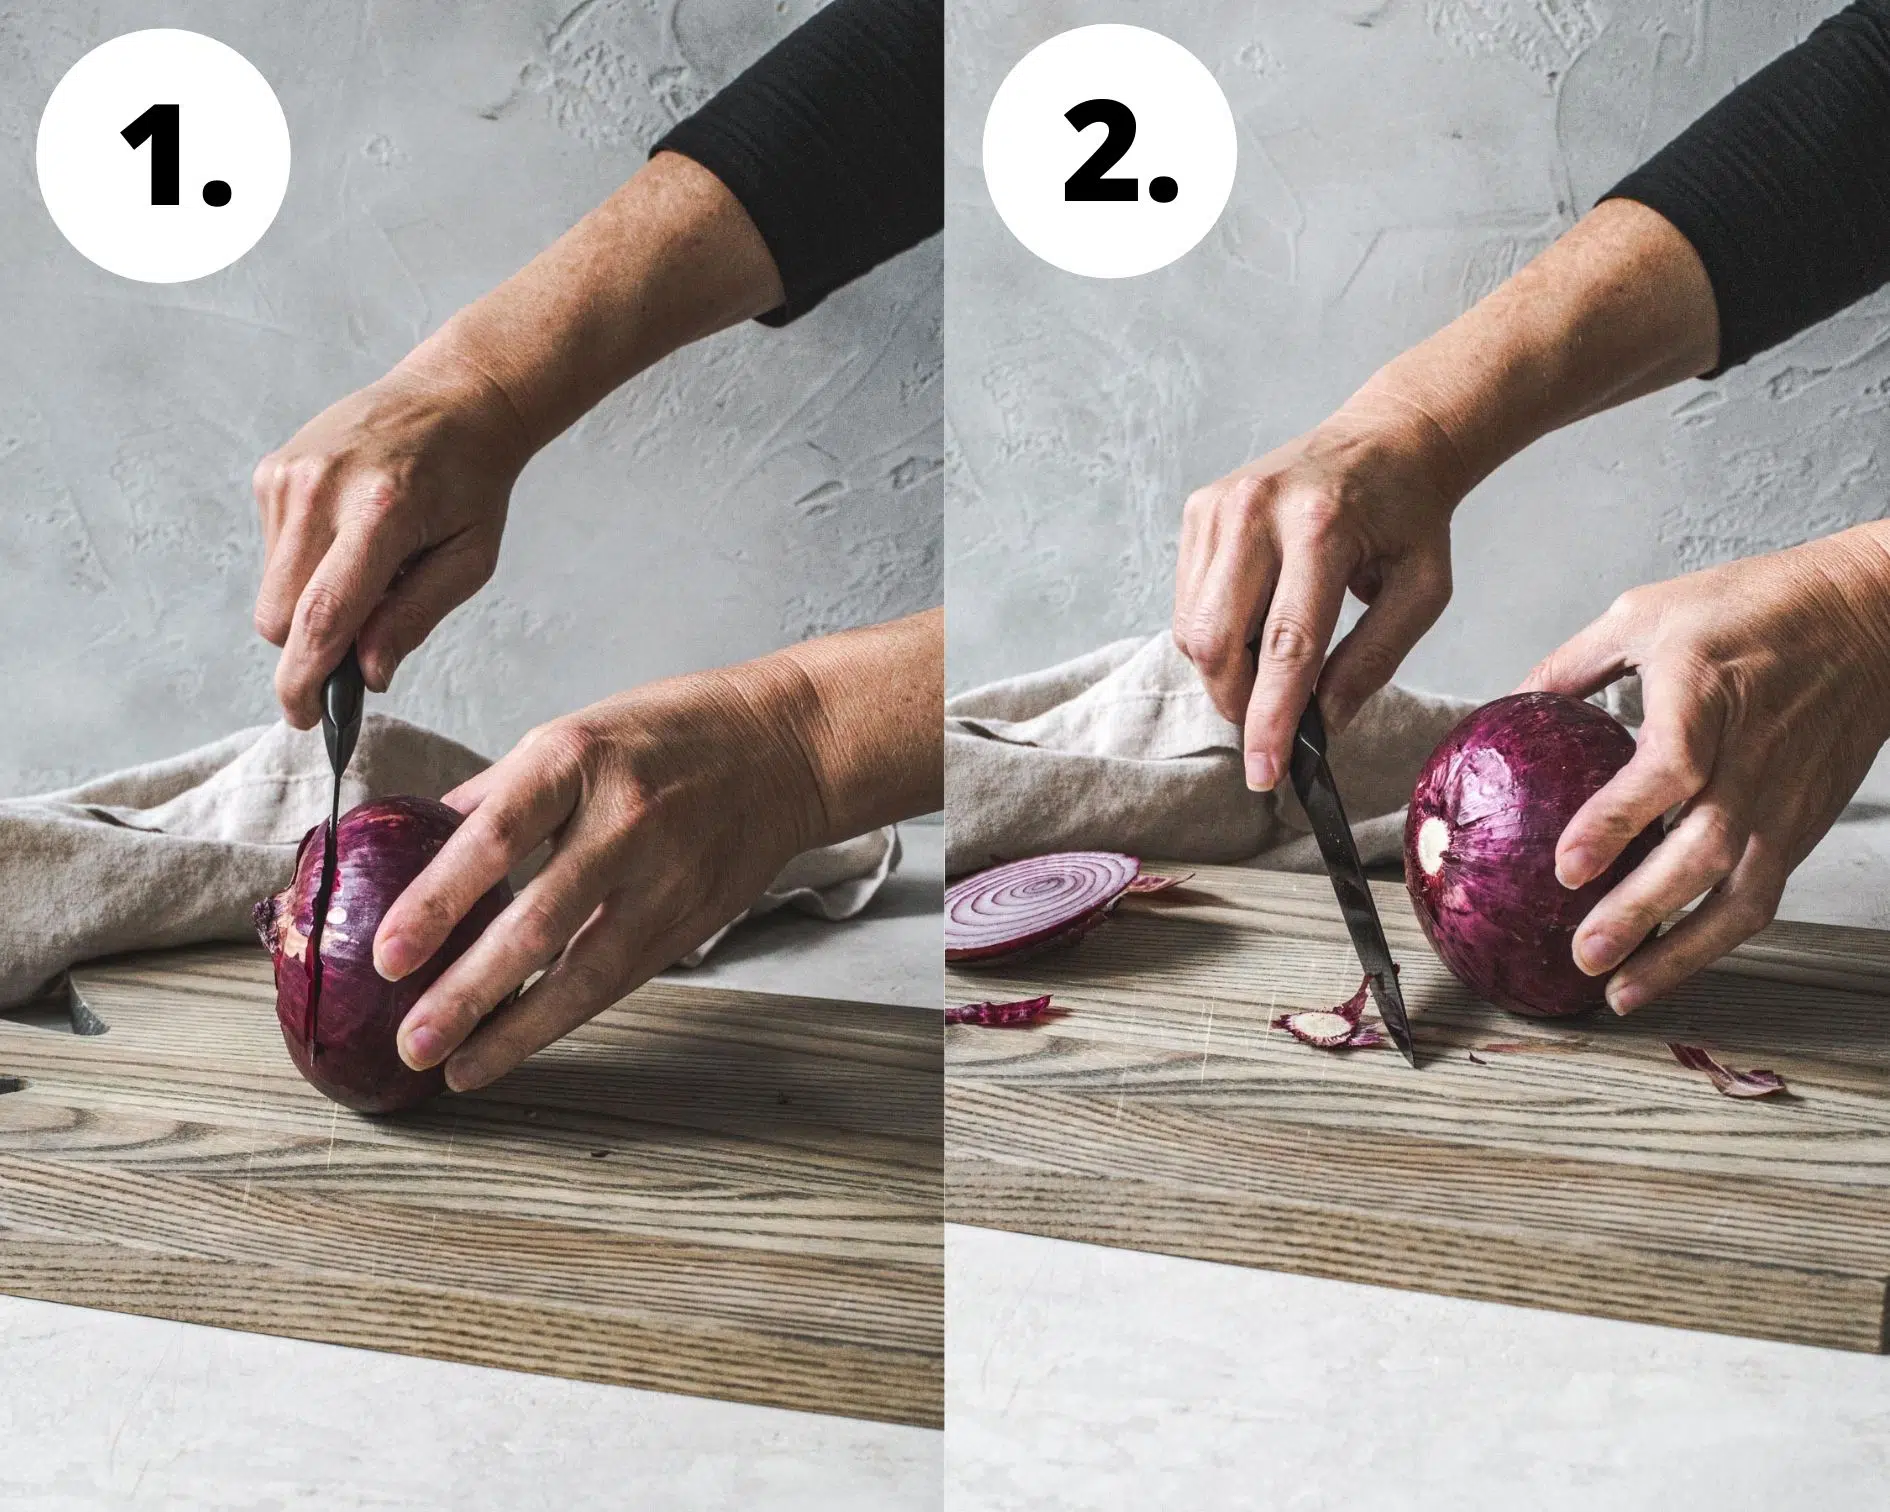 Process steps 1 and 2 for how to cut an onion.